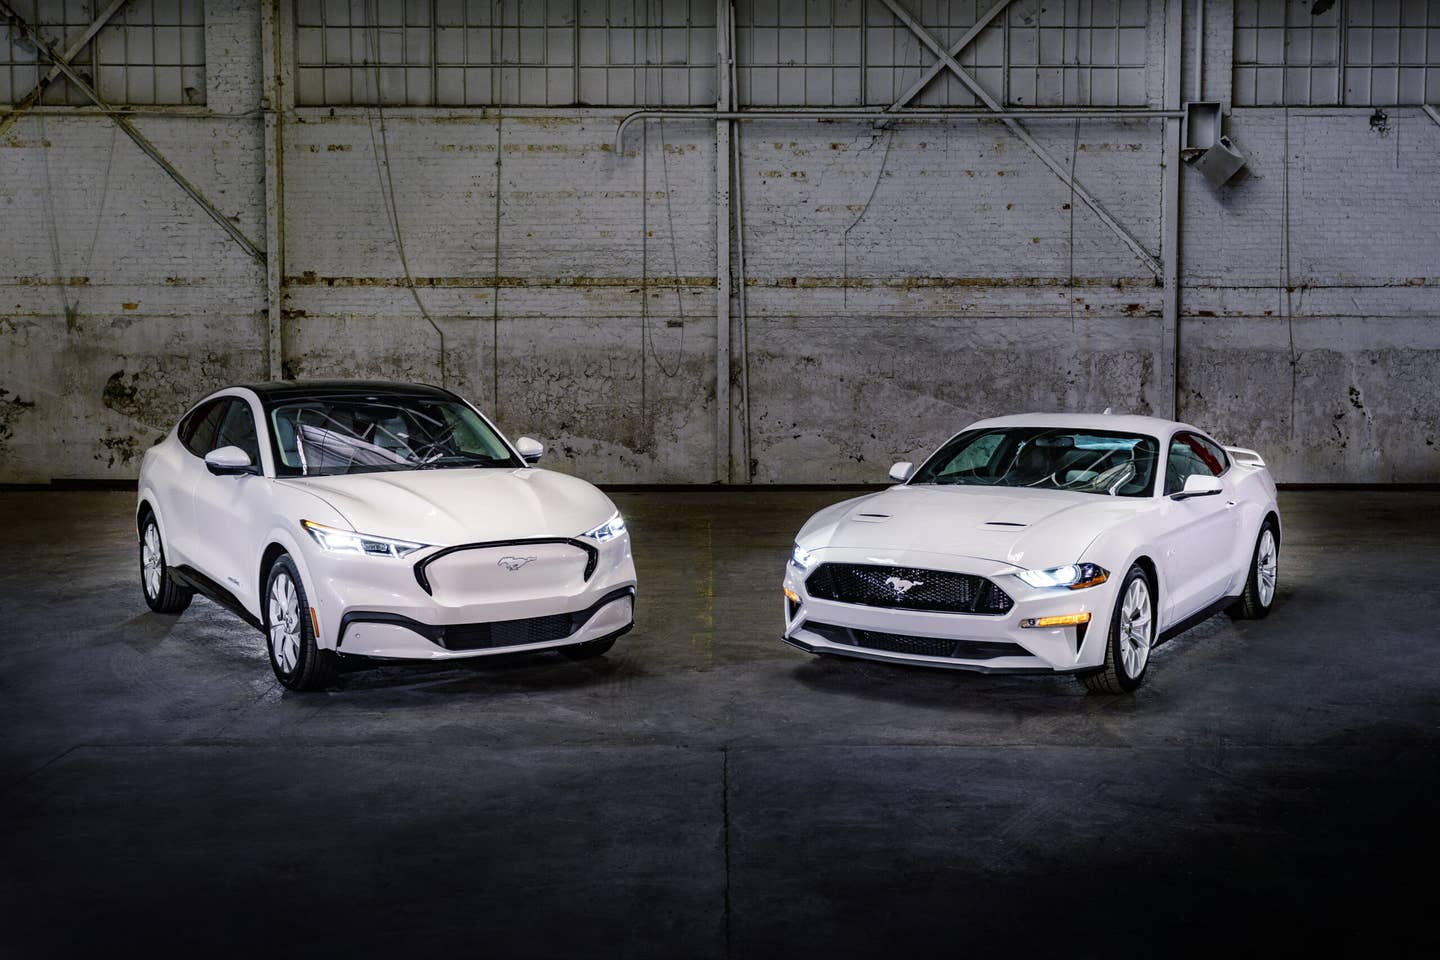 Available Ice White Appearance Package on appropriately configured 2022 Mustang Mach-E and Mustang Coupe models. Closed course.